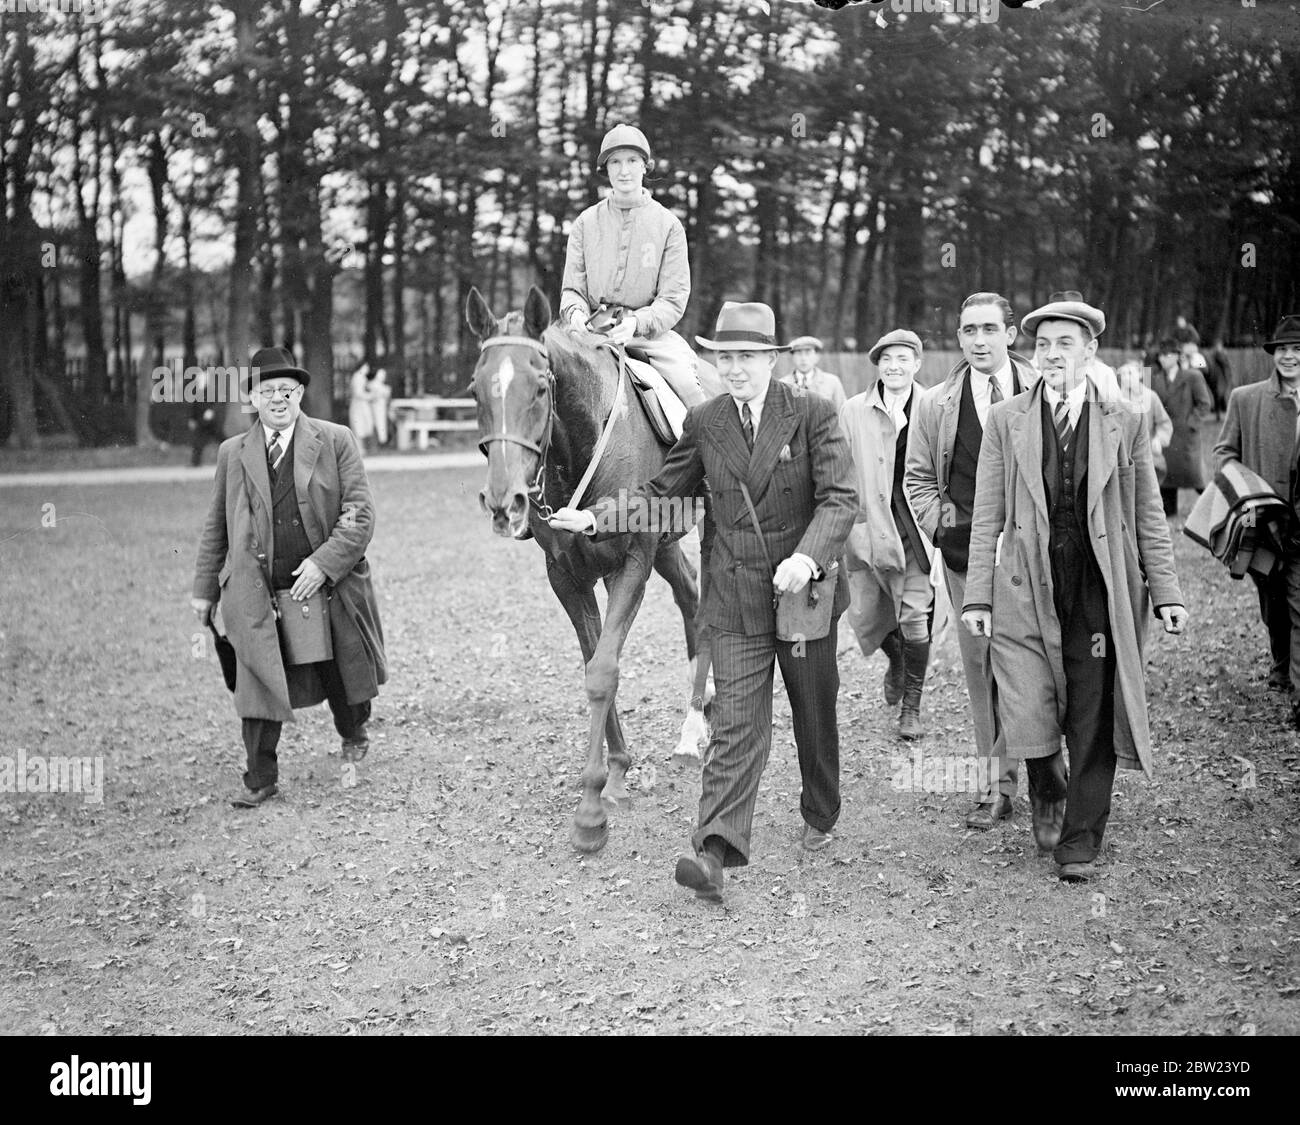 Winner of Britain's only race for women jockeys. Mrs S Langley, daughter of the Newmarket trainer, Walter Earl, one the Newmarket Town Plate, Britain's only race for women jockeys on Mr N E Dixons 'Lucky Patch' at Newmarket. The race, centuries old, is run over 4 miles and is a stern test of stamina for riders and horses. 13 October 1938 Stock Photo